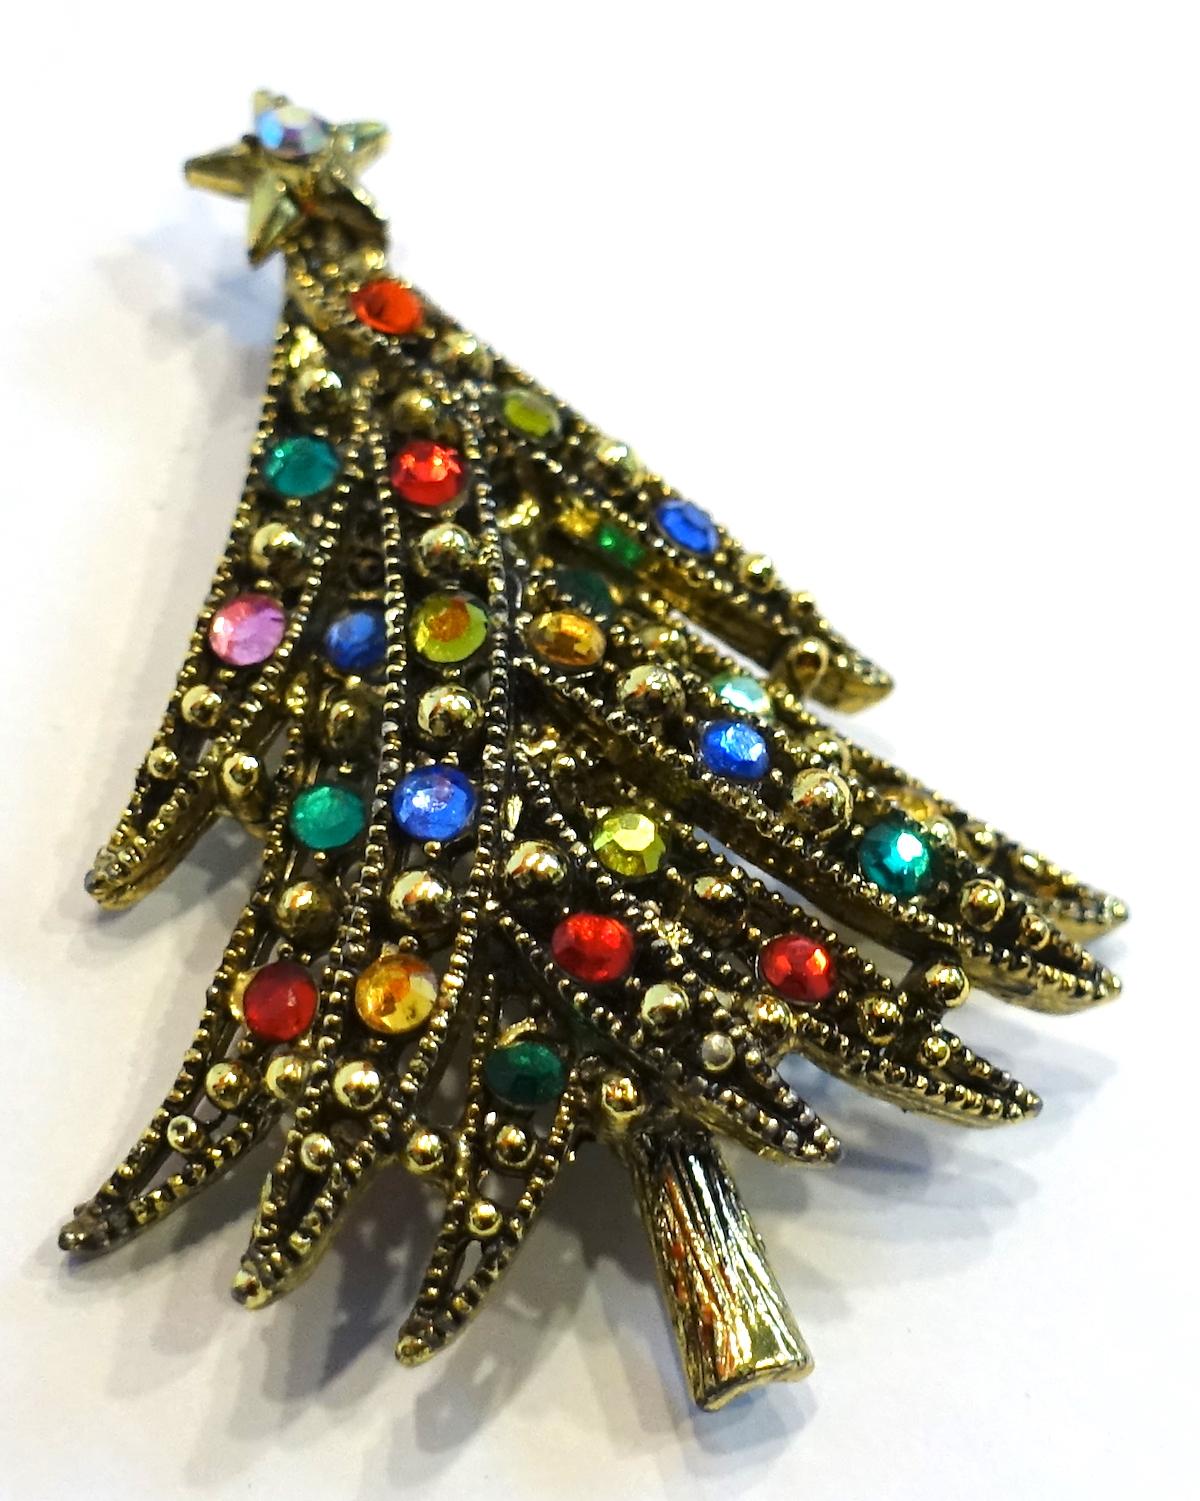 This is a famous vintage Christmas tree brooch by Hollycraft. It has multi-color crystals decorating the tree in a gold tone setting.  This brooch measures 2-1/8” x 1-5/8” and is signed “Hollycraft”. It is in excellent condition.